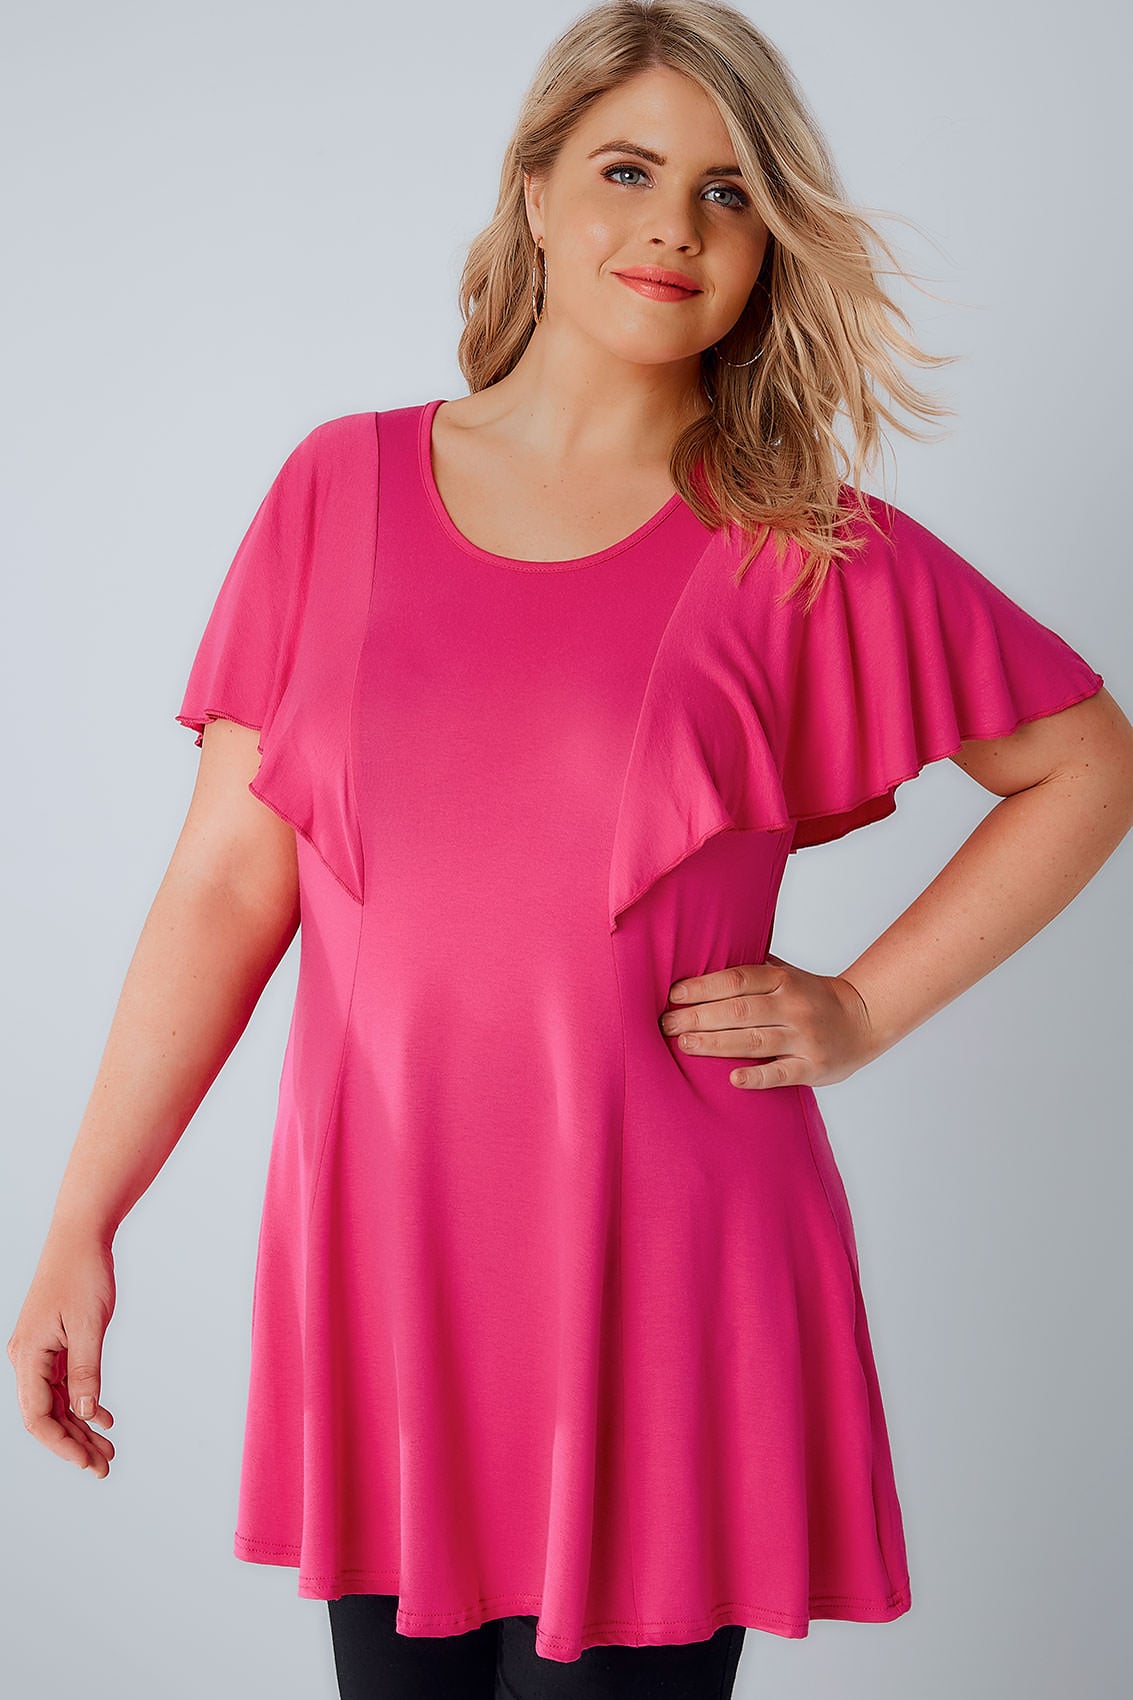 Hot Pink Peplum Top With Frill Angel Sleeves, Plus size 16 to 36